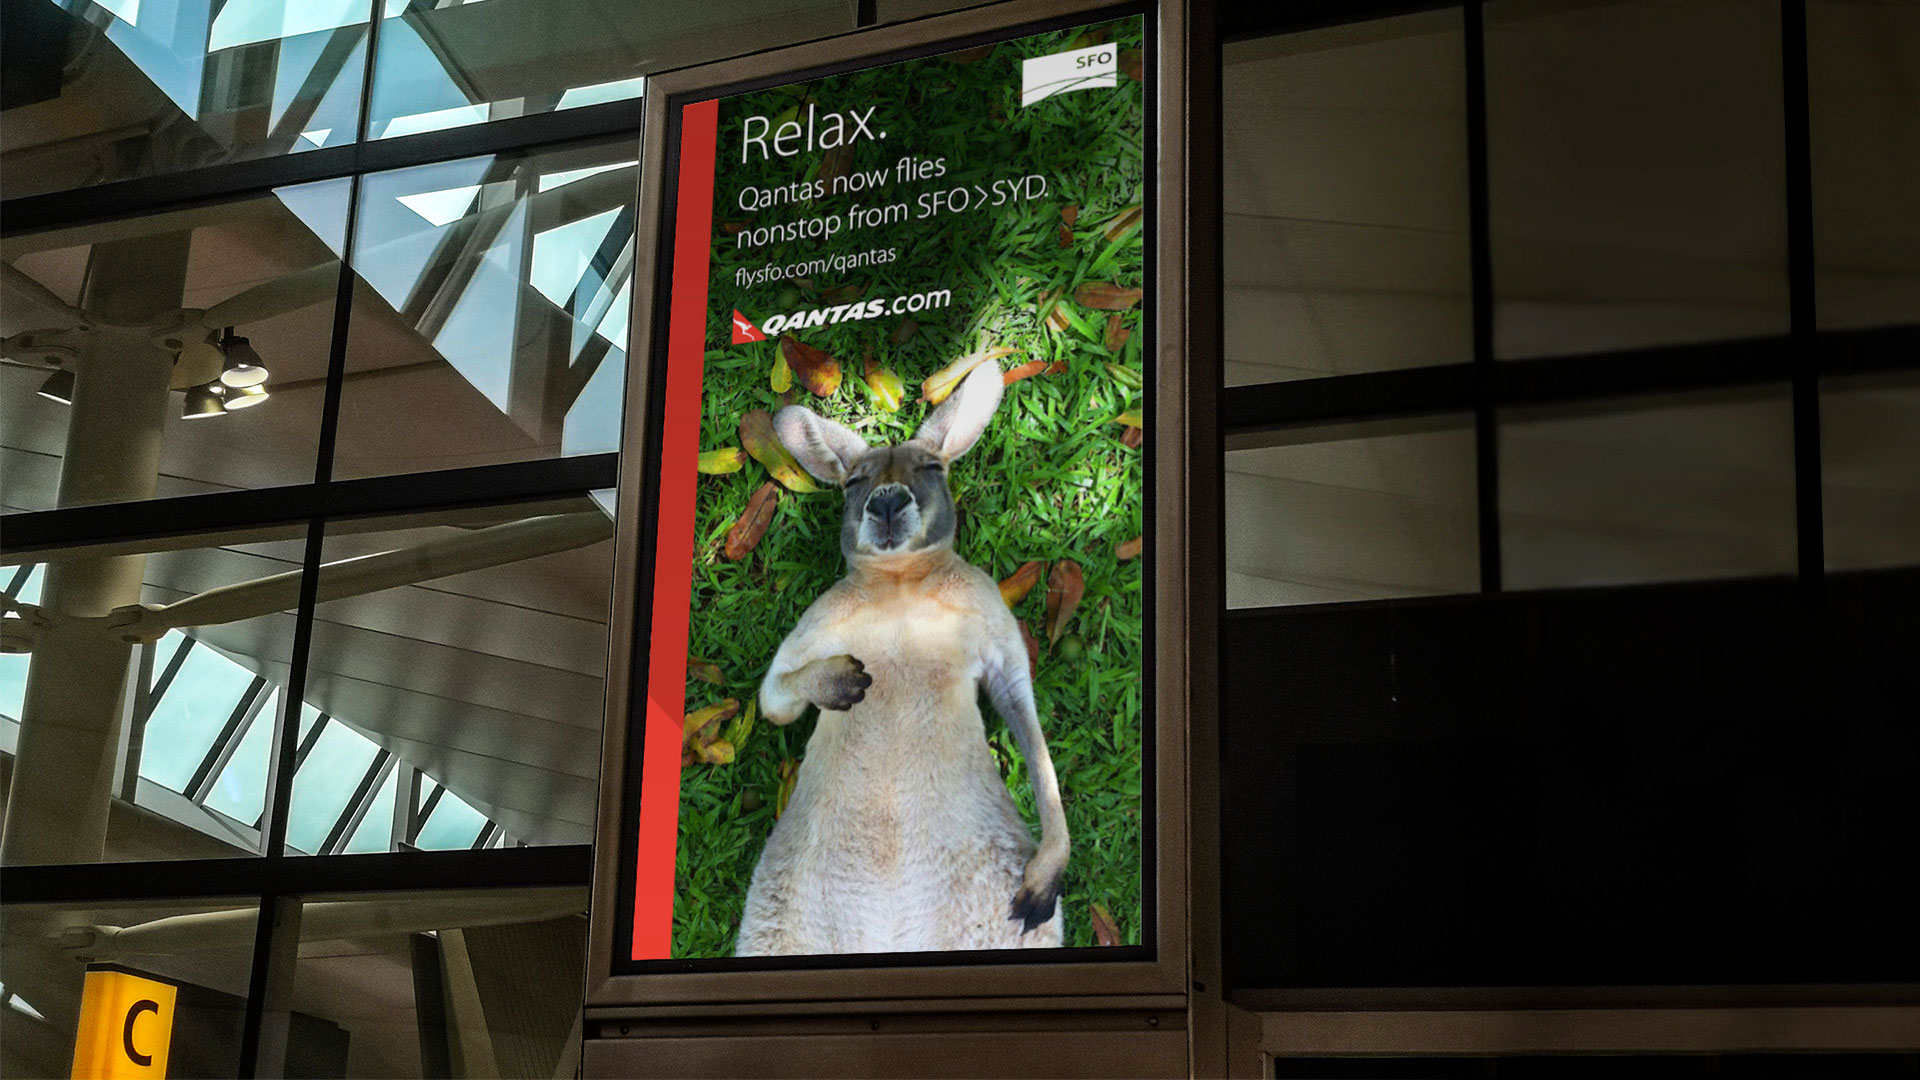 SFO poster: Relax. Qantas now flies nonstop from SFO to SYD. Fly Qantas.